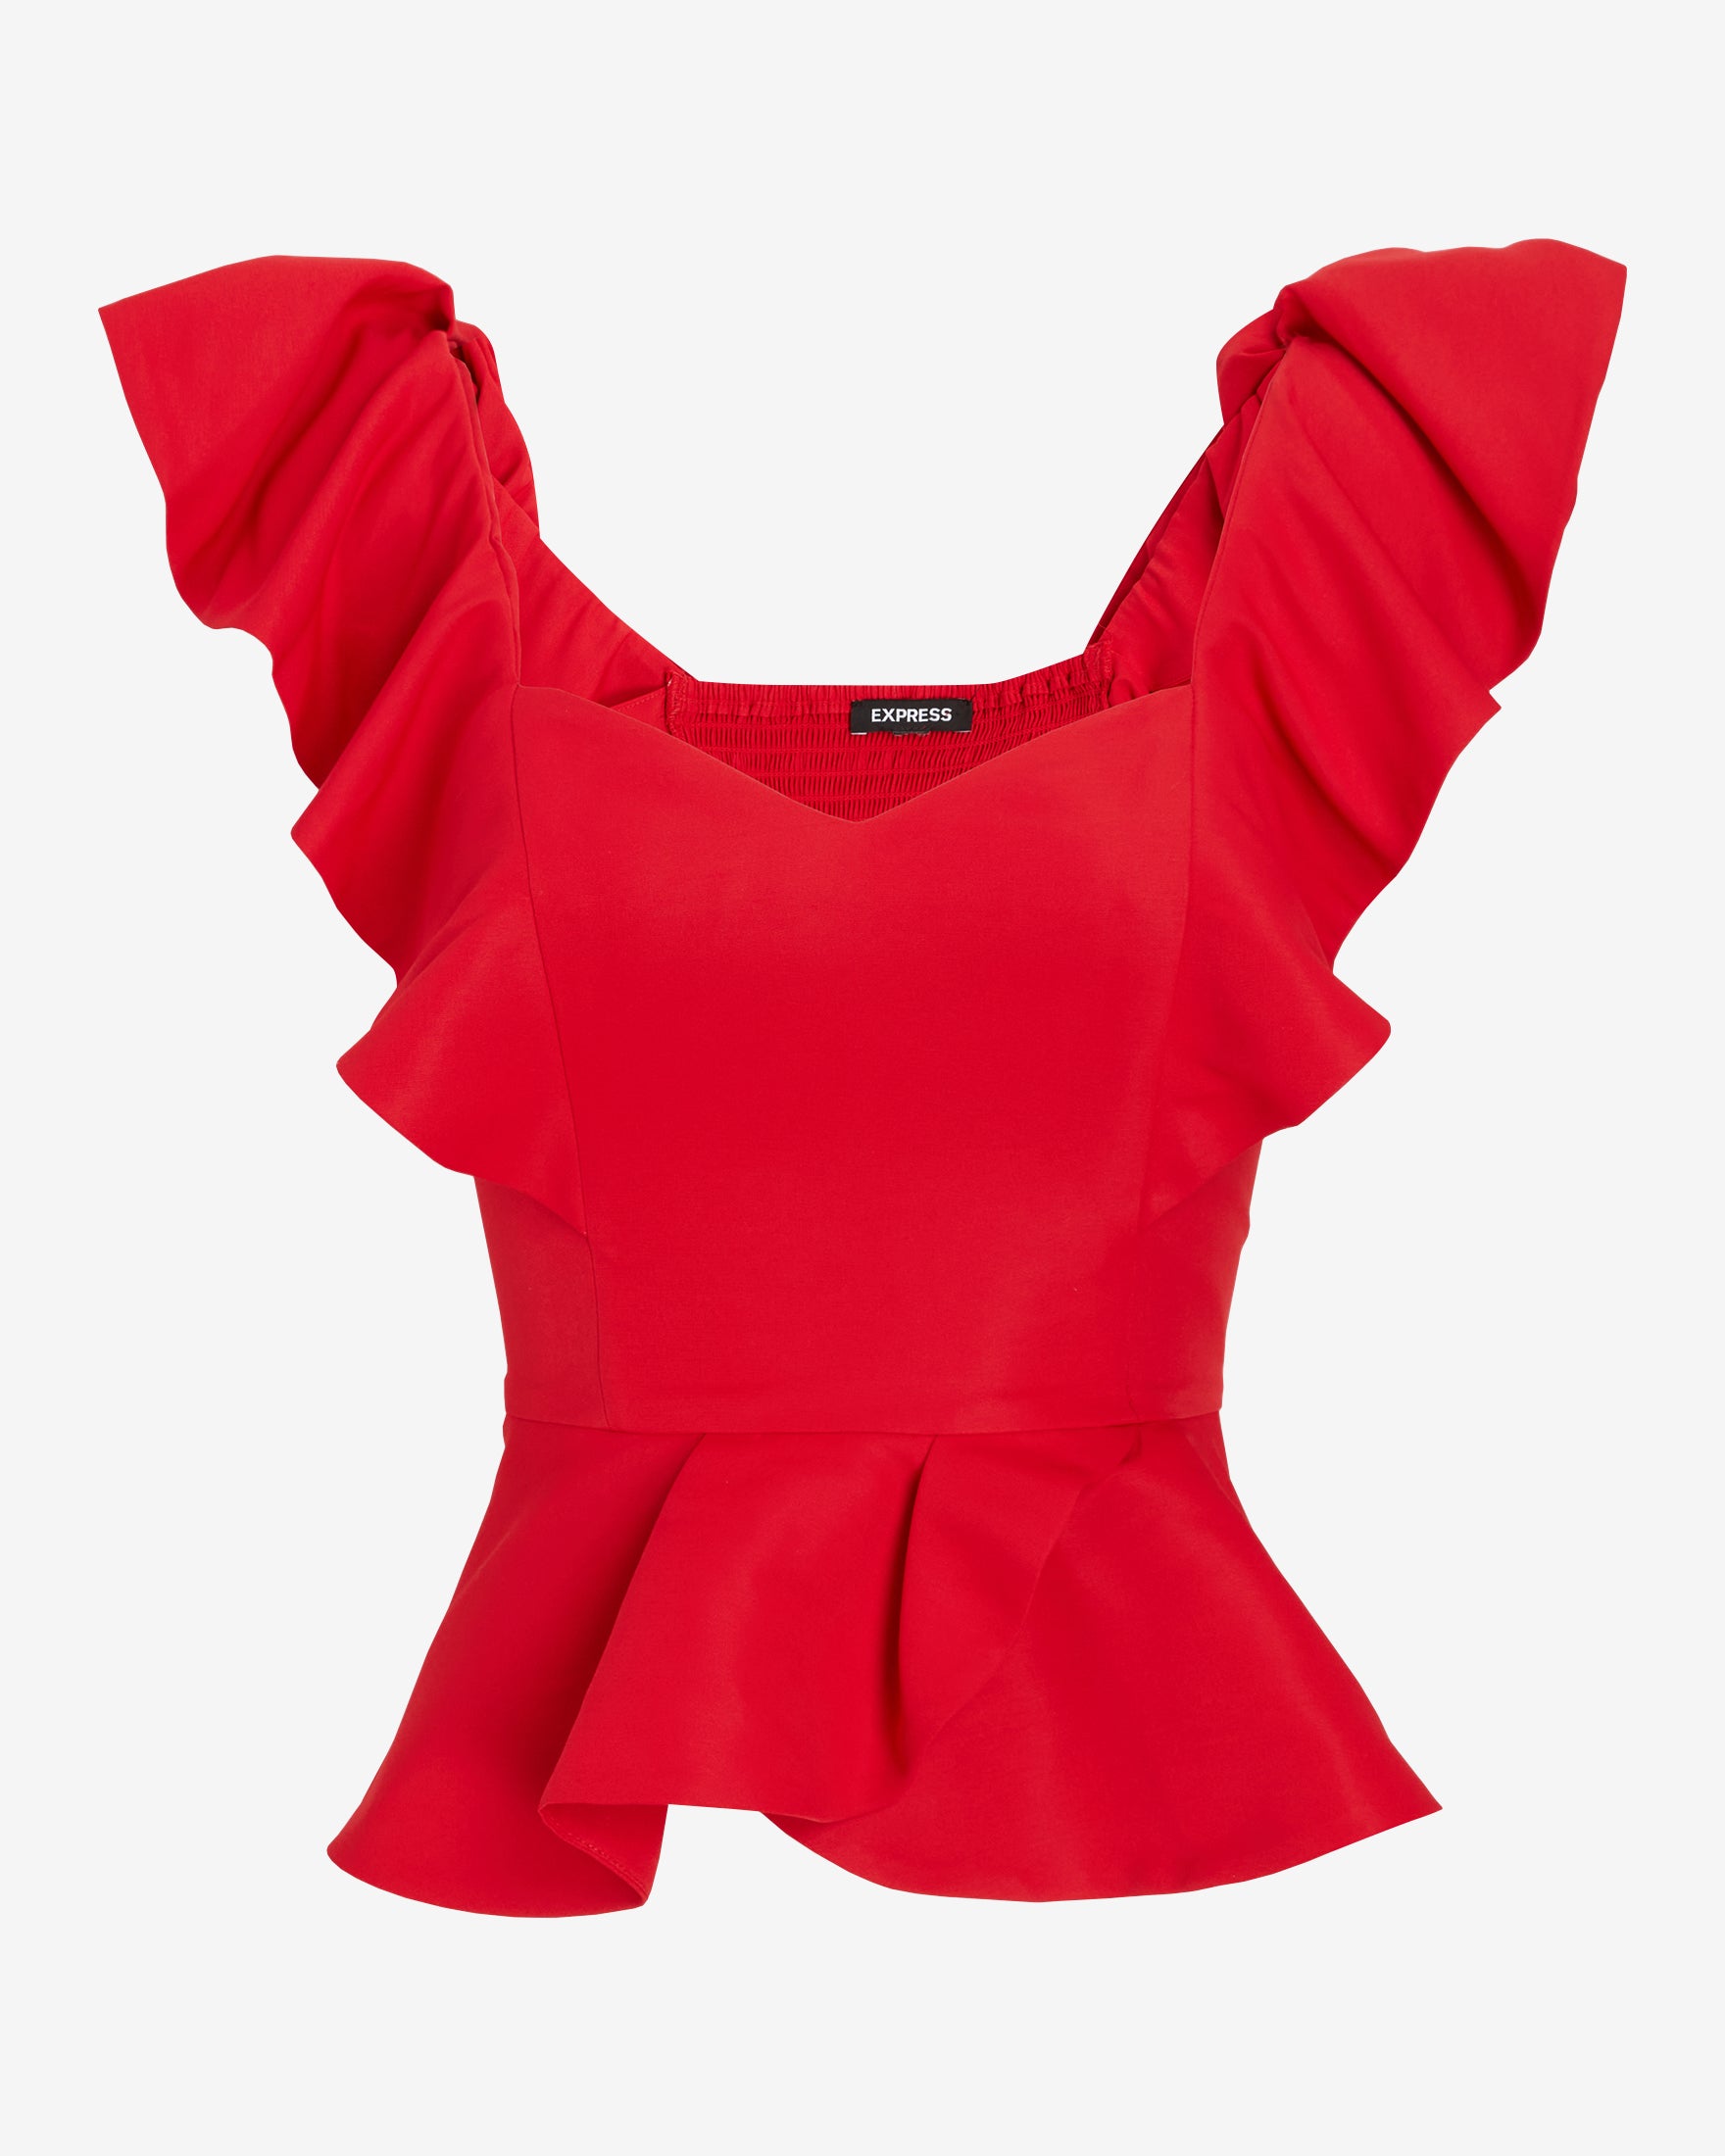 Red top with flutter sleeves and sweetheart neckline